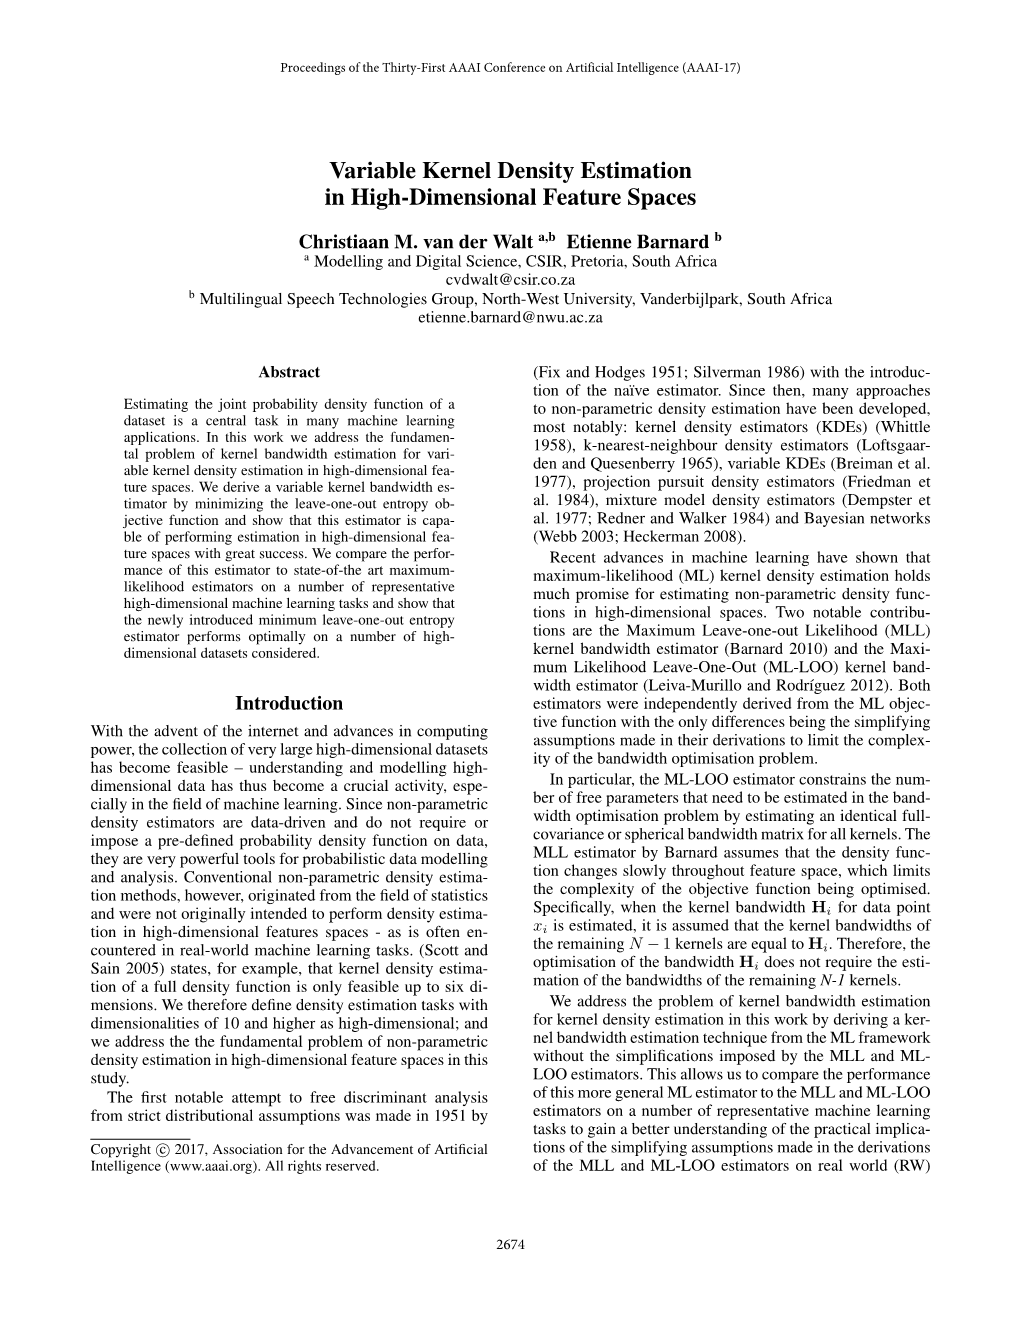 Variable Kernel Density Estimation in High-Dimensional Feature Spaces